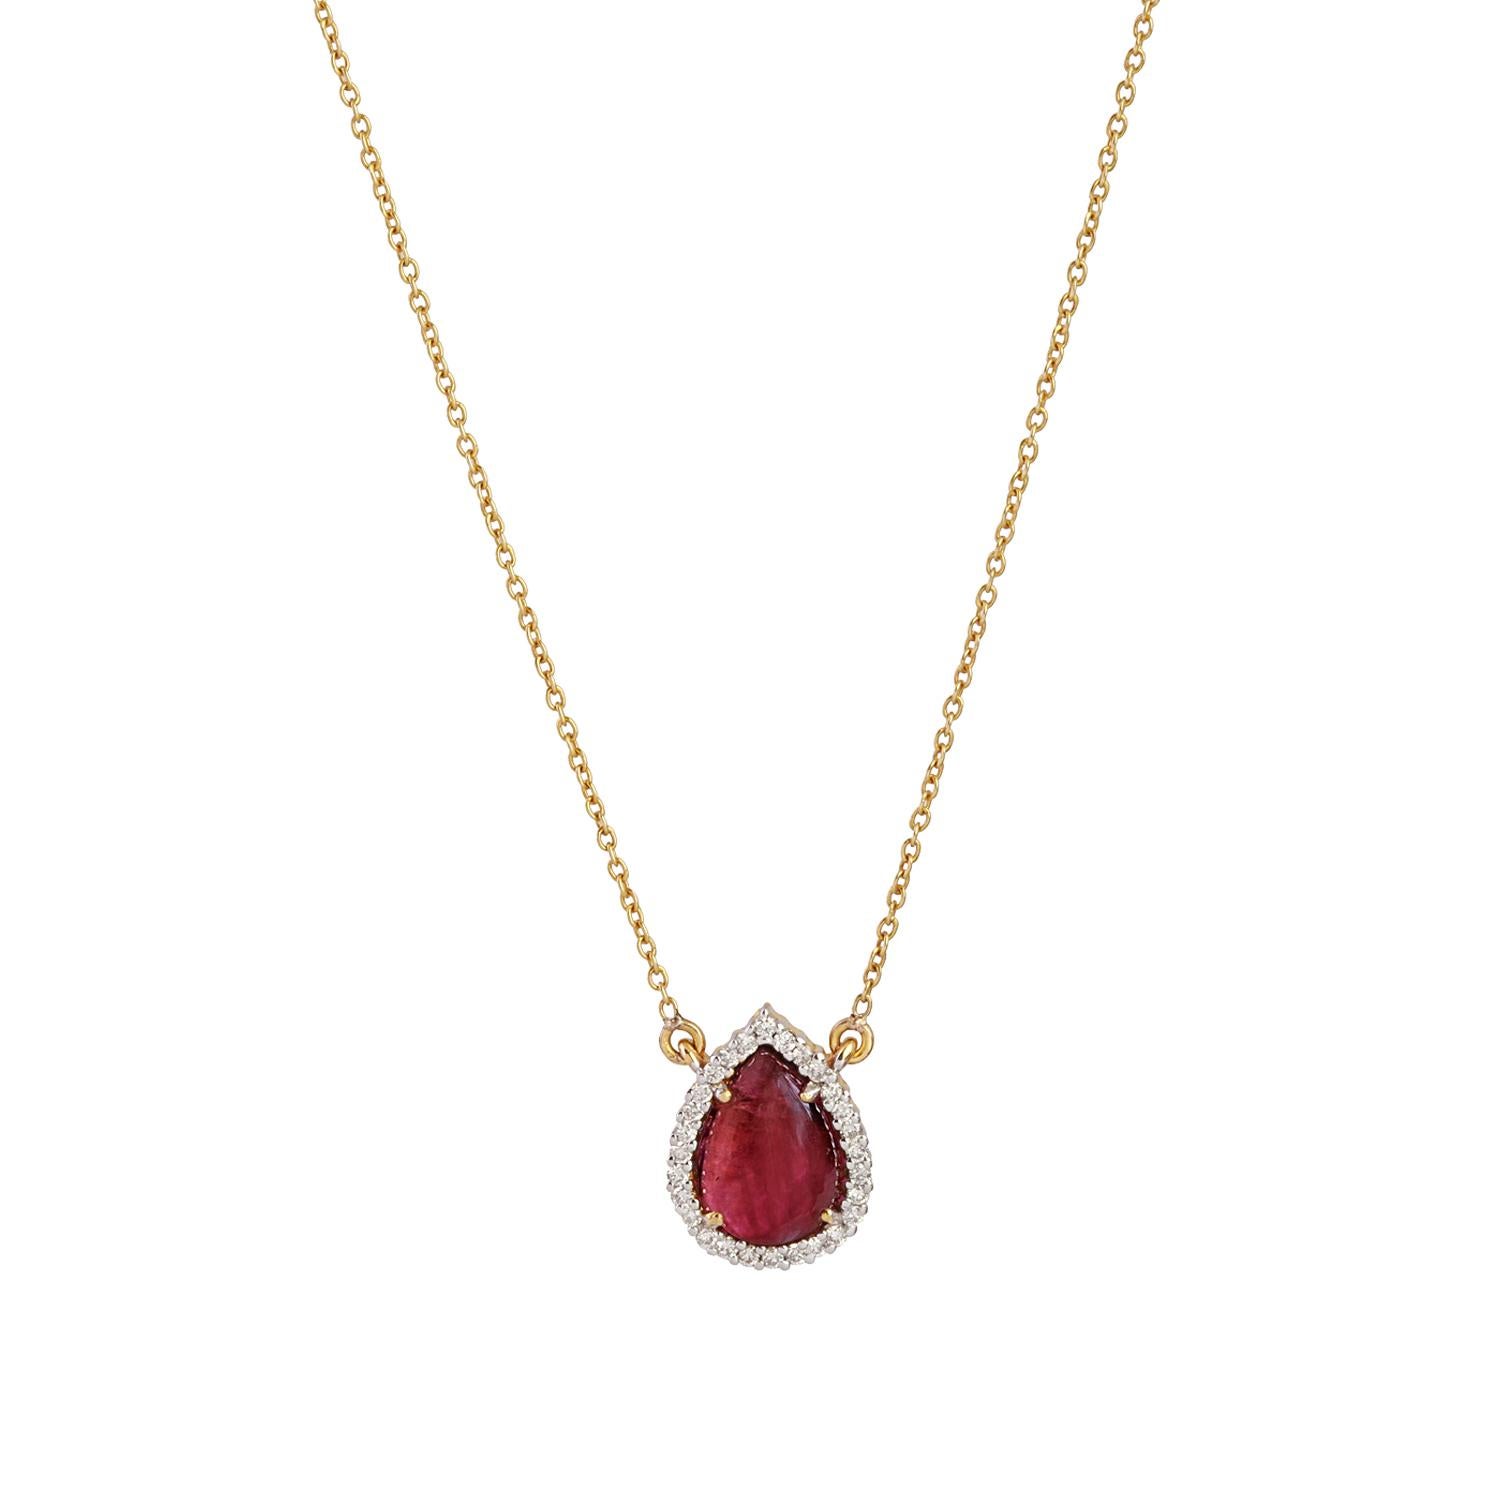 This is a beautiful 14K Gold Pink Tourmaline and Diamond pendant with a chain also made up of 14K Gold. High-quality natural diamonds and pink tourmaline is used in this product. It is ideal for every occasion.
Item Specifications :
Gross Weight: